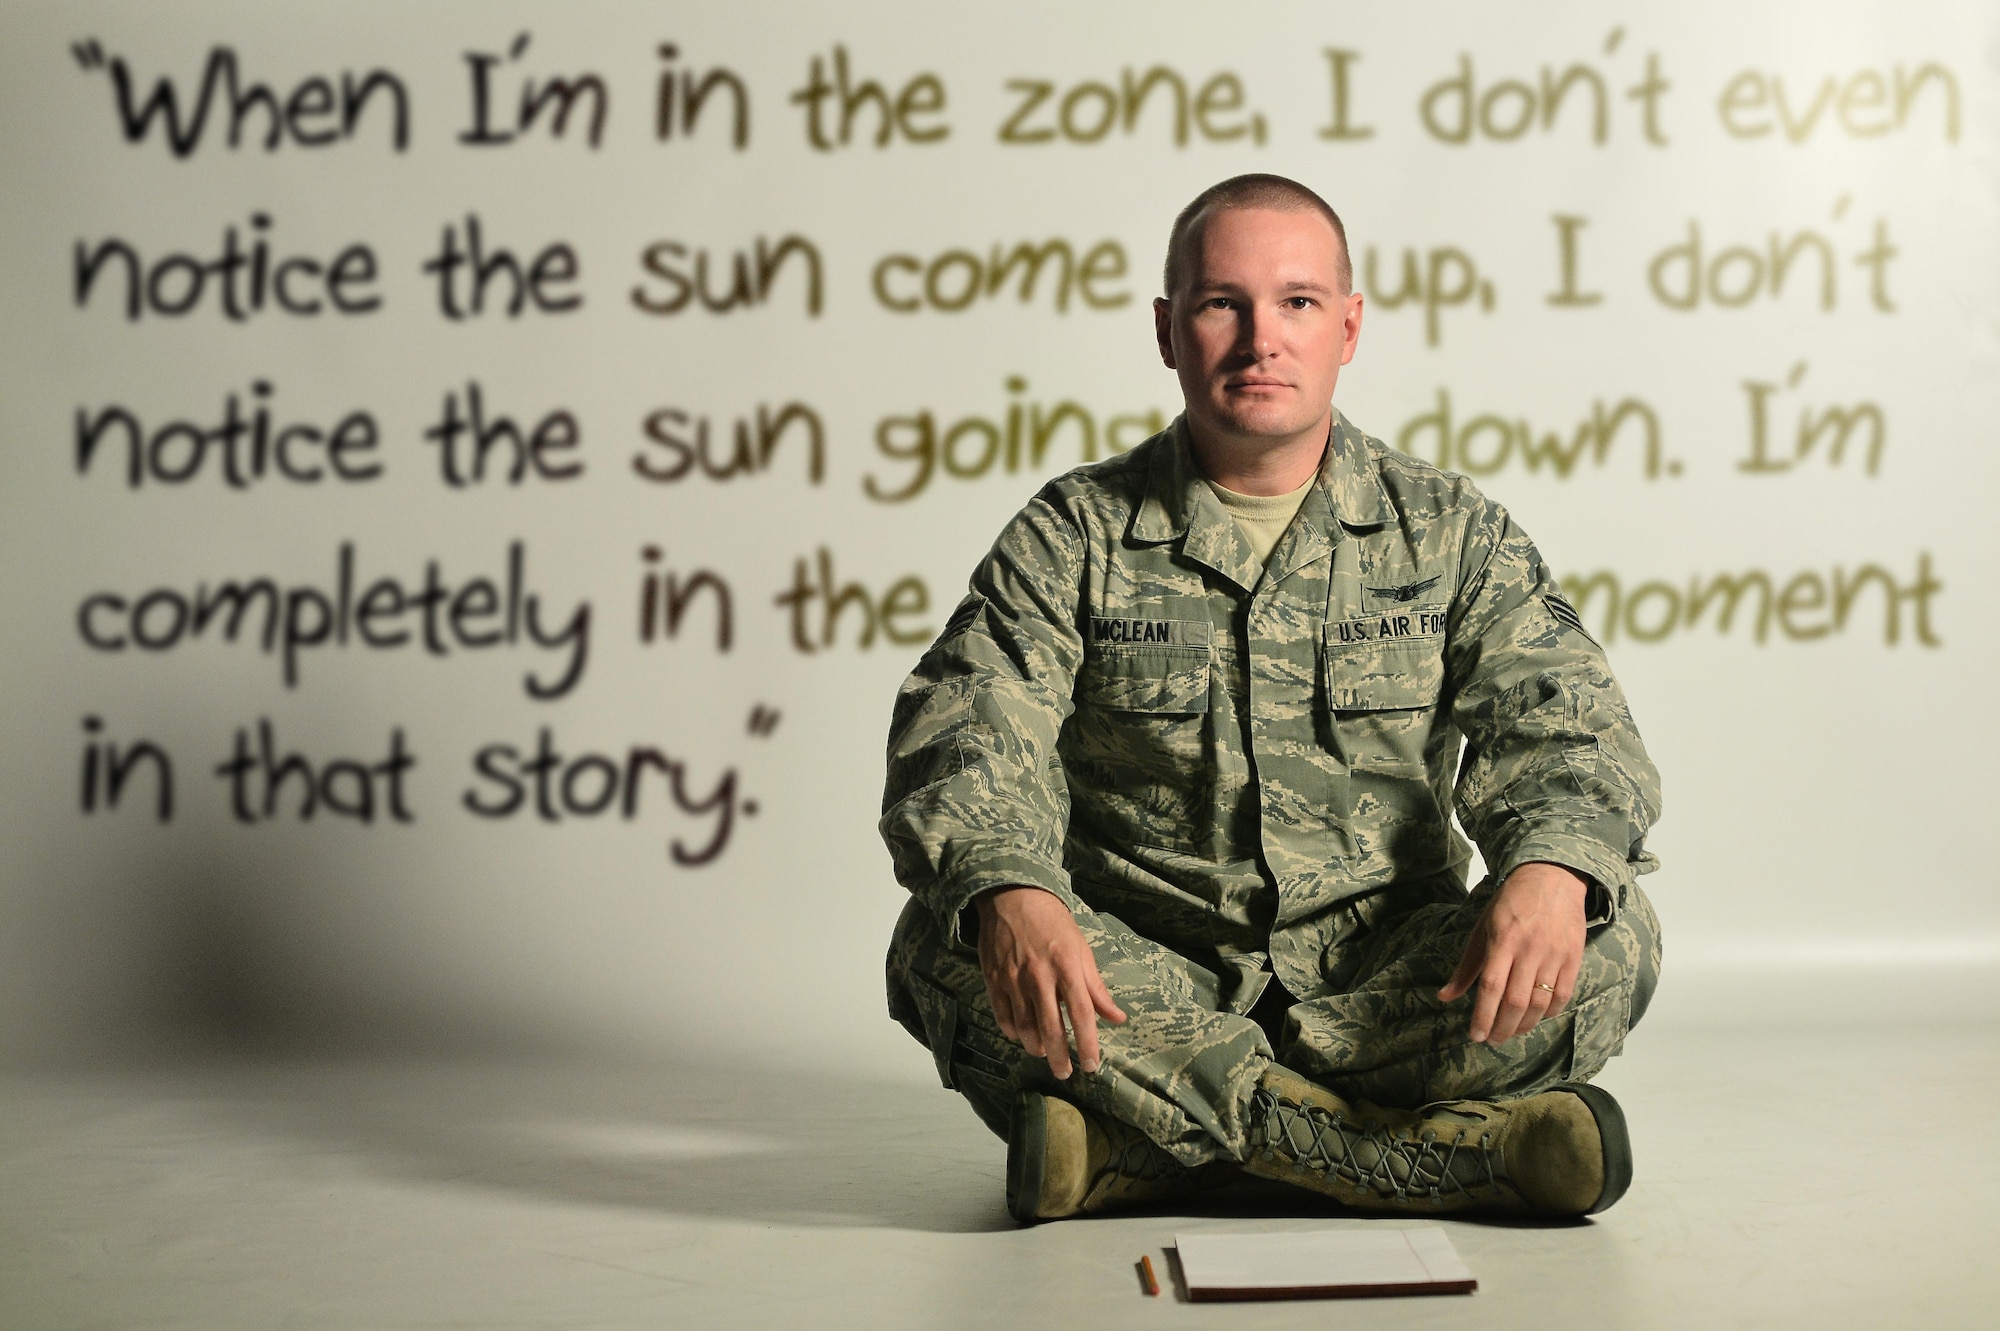 Senior Airman Brian McLean, a 11th Space Warning Squadron, Future Operations Flight staff instructor, is the main point of contact for HEO-3 training and operations. In his spare time, he writes fictional short stories. (U.S. Air Force photo/Staff Sgt. Darren Scott)